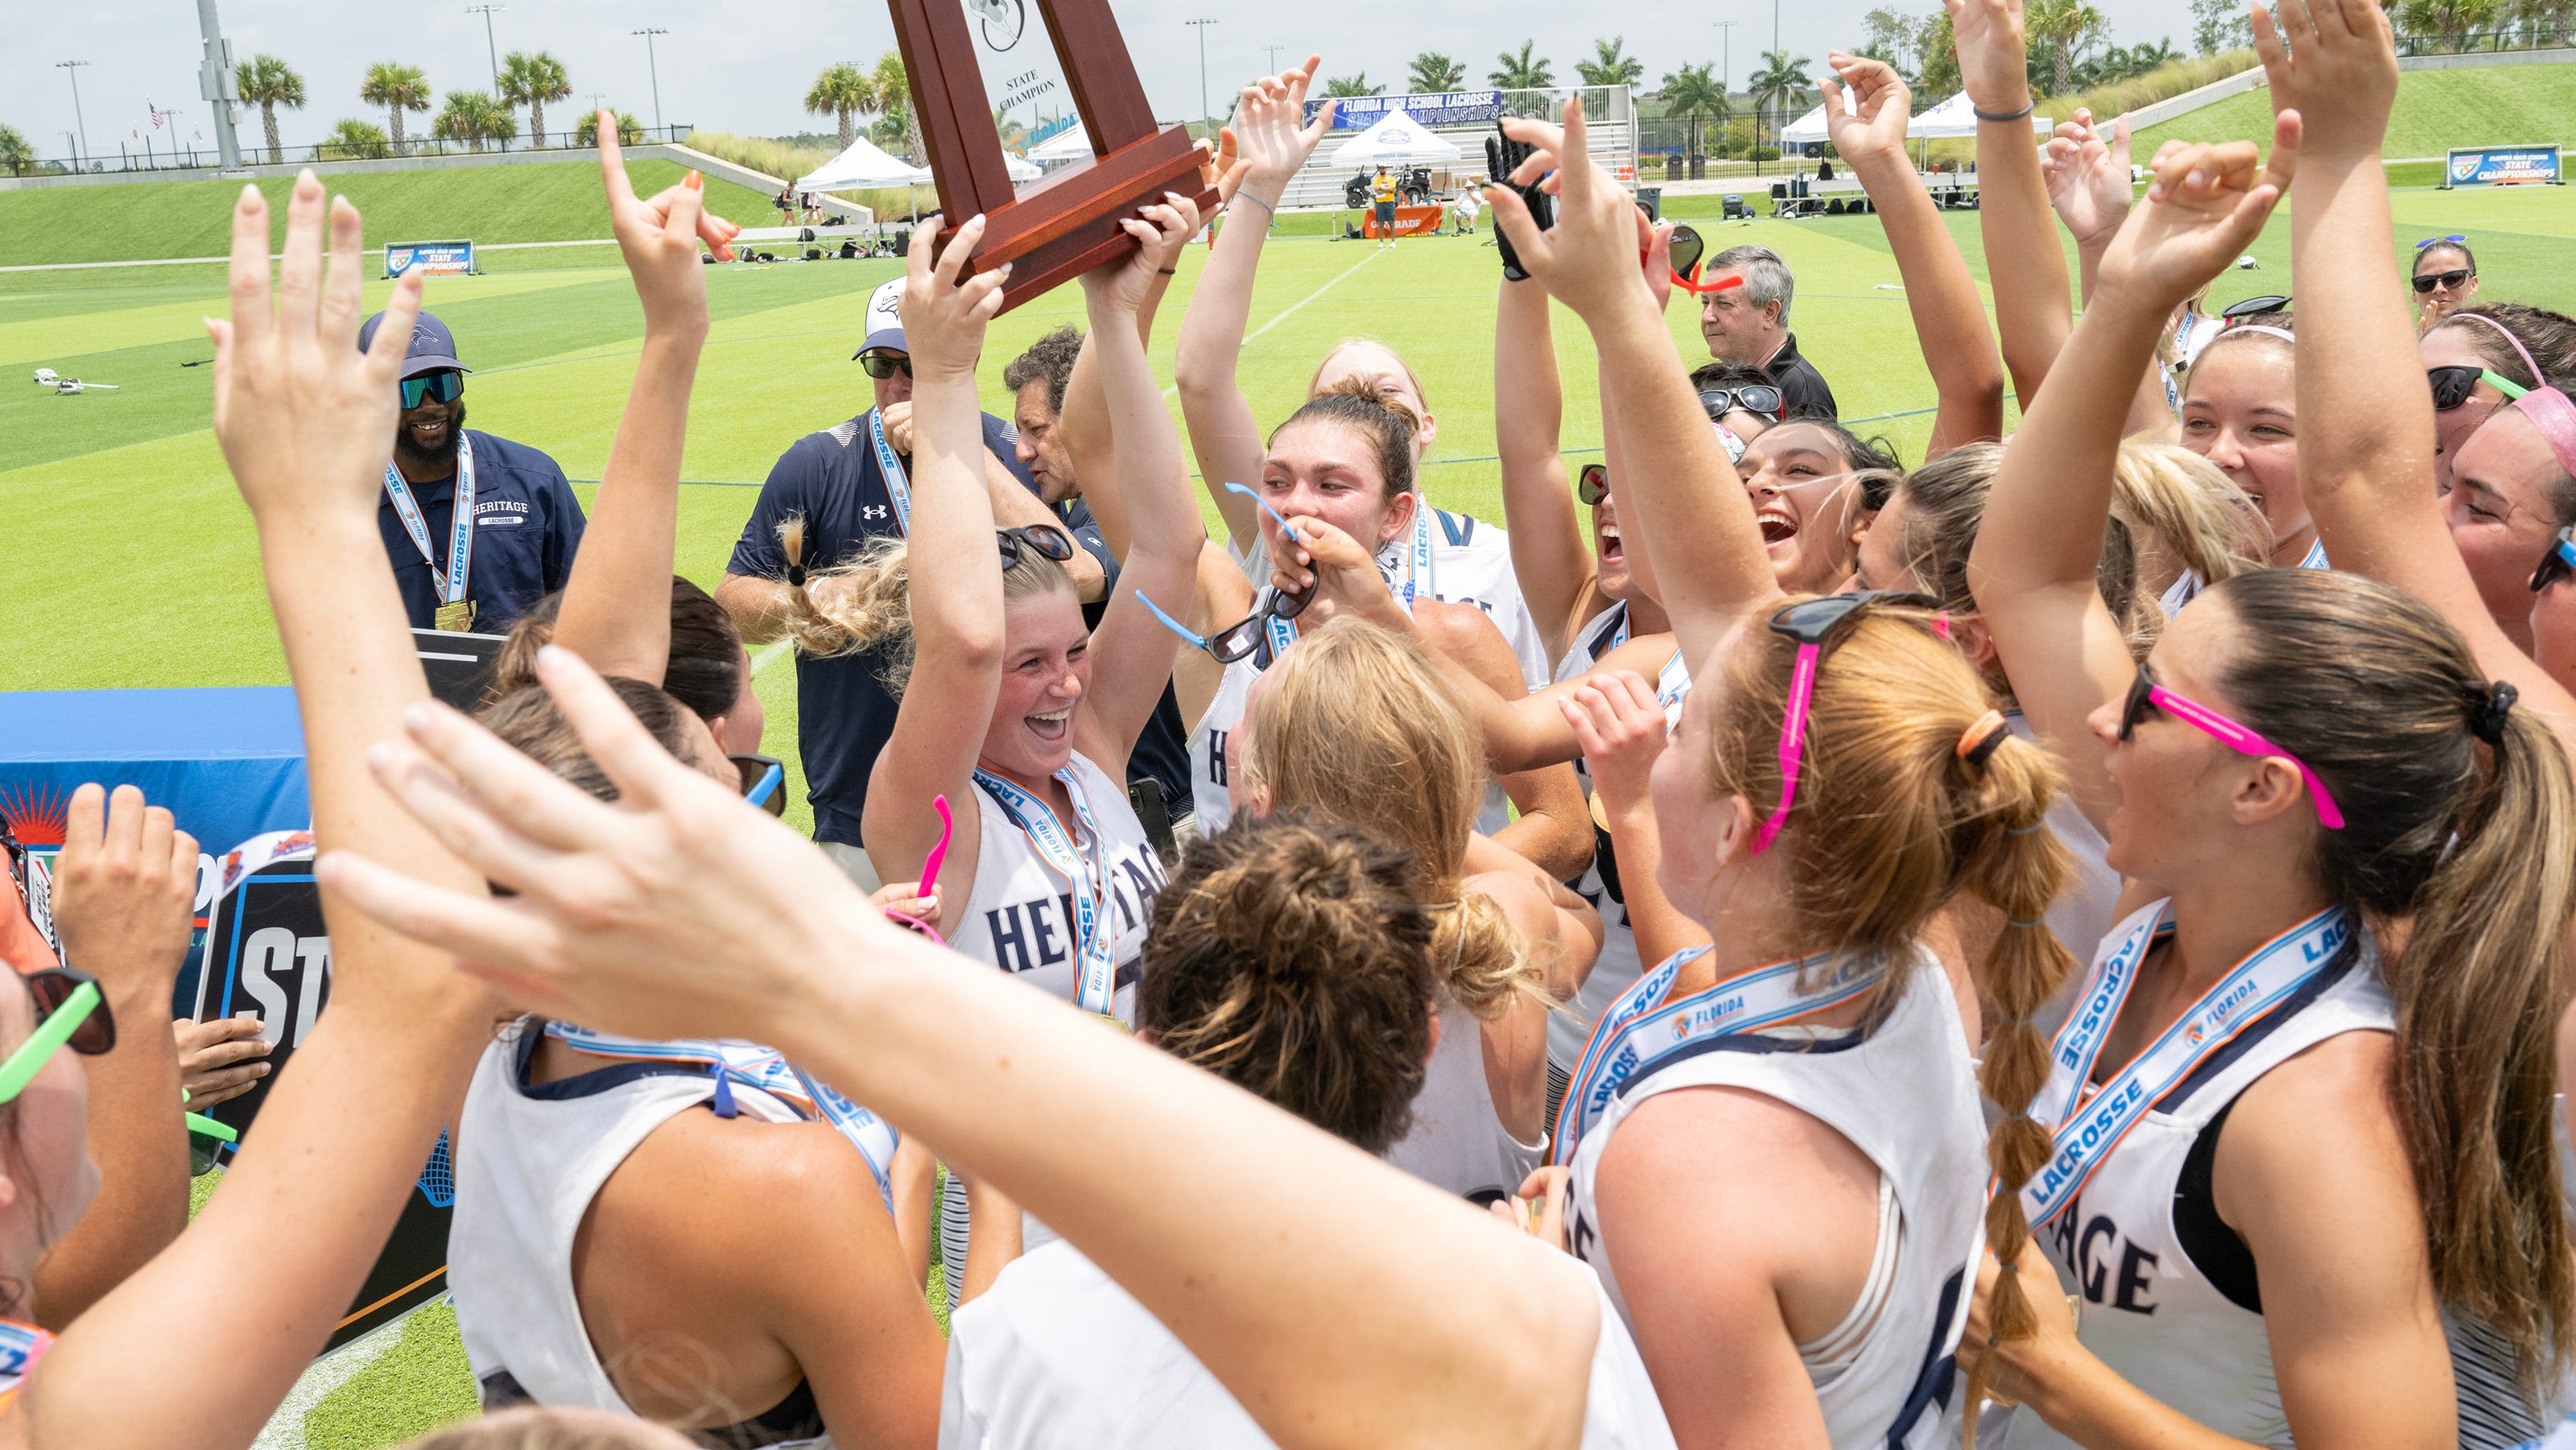 Back-to-back: Heritage-Delray girls lacrosse defends title with win over Lake Highland